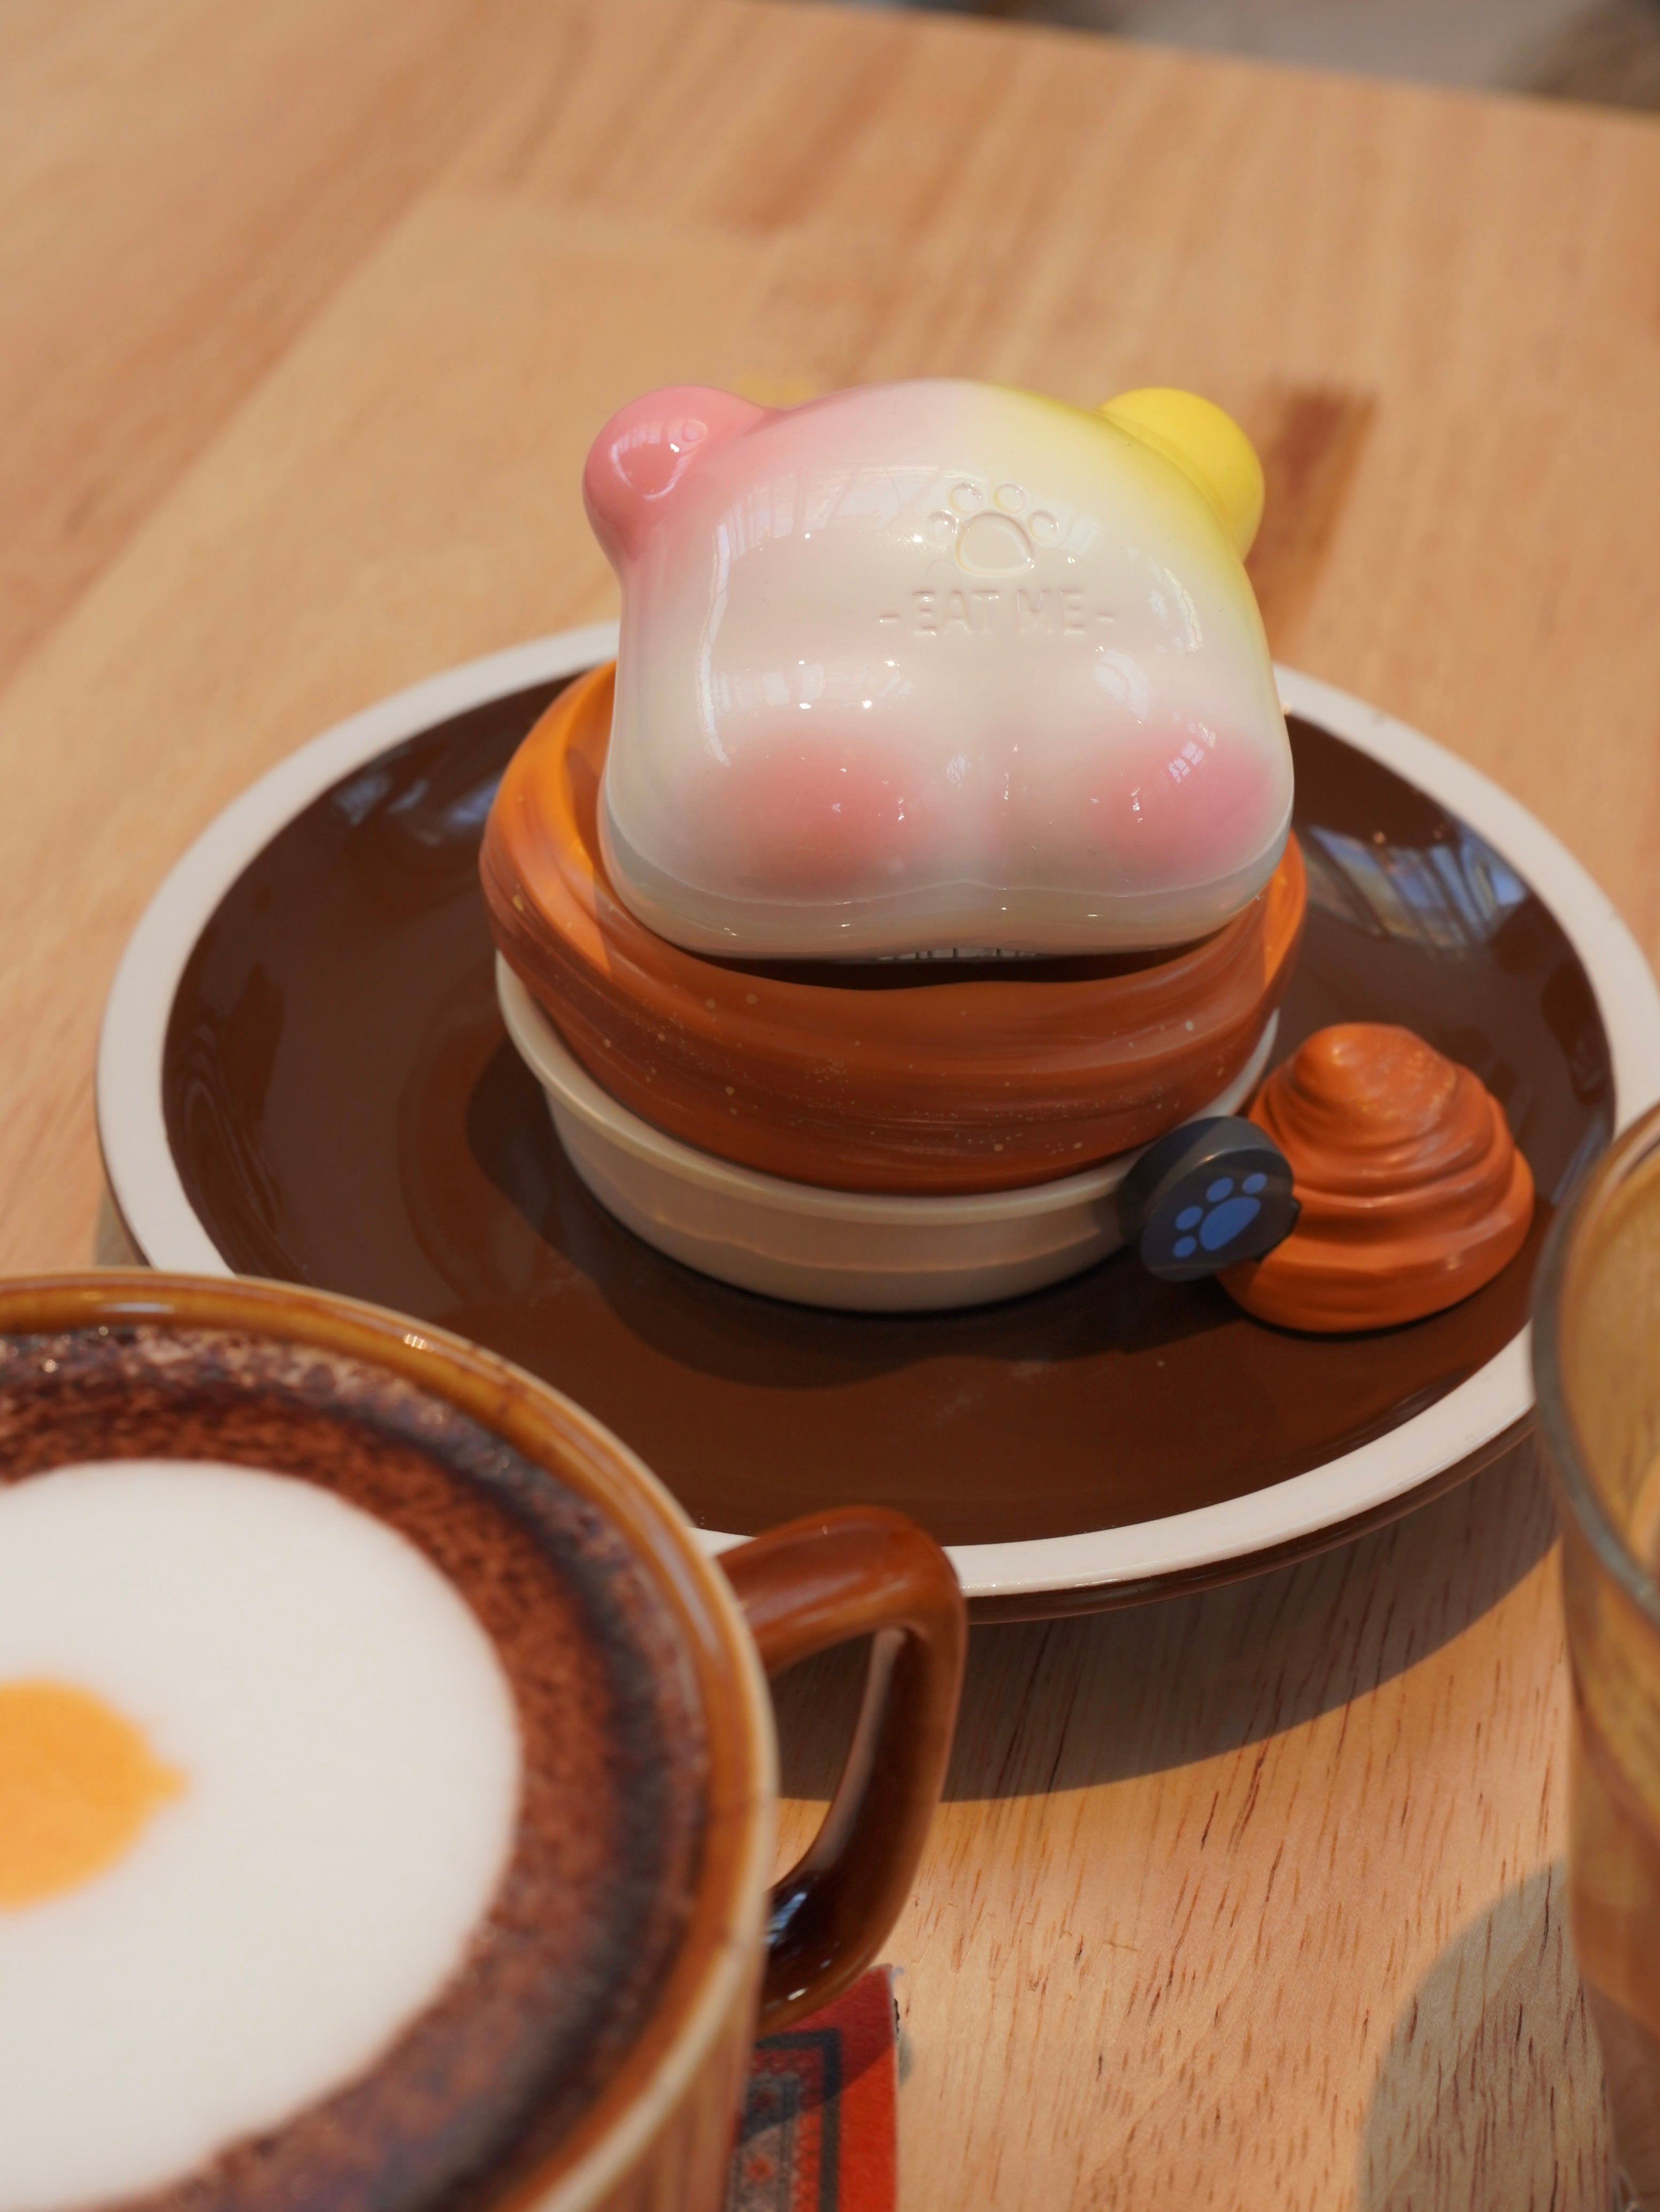 Croissant Han Han figurine on plate with coffee cup, piggy bank, and more.